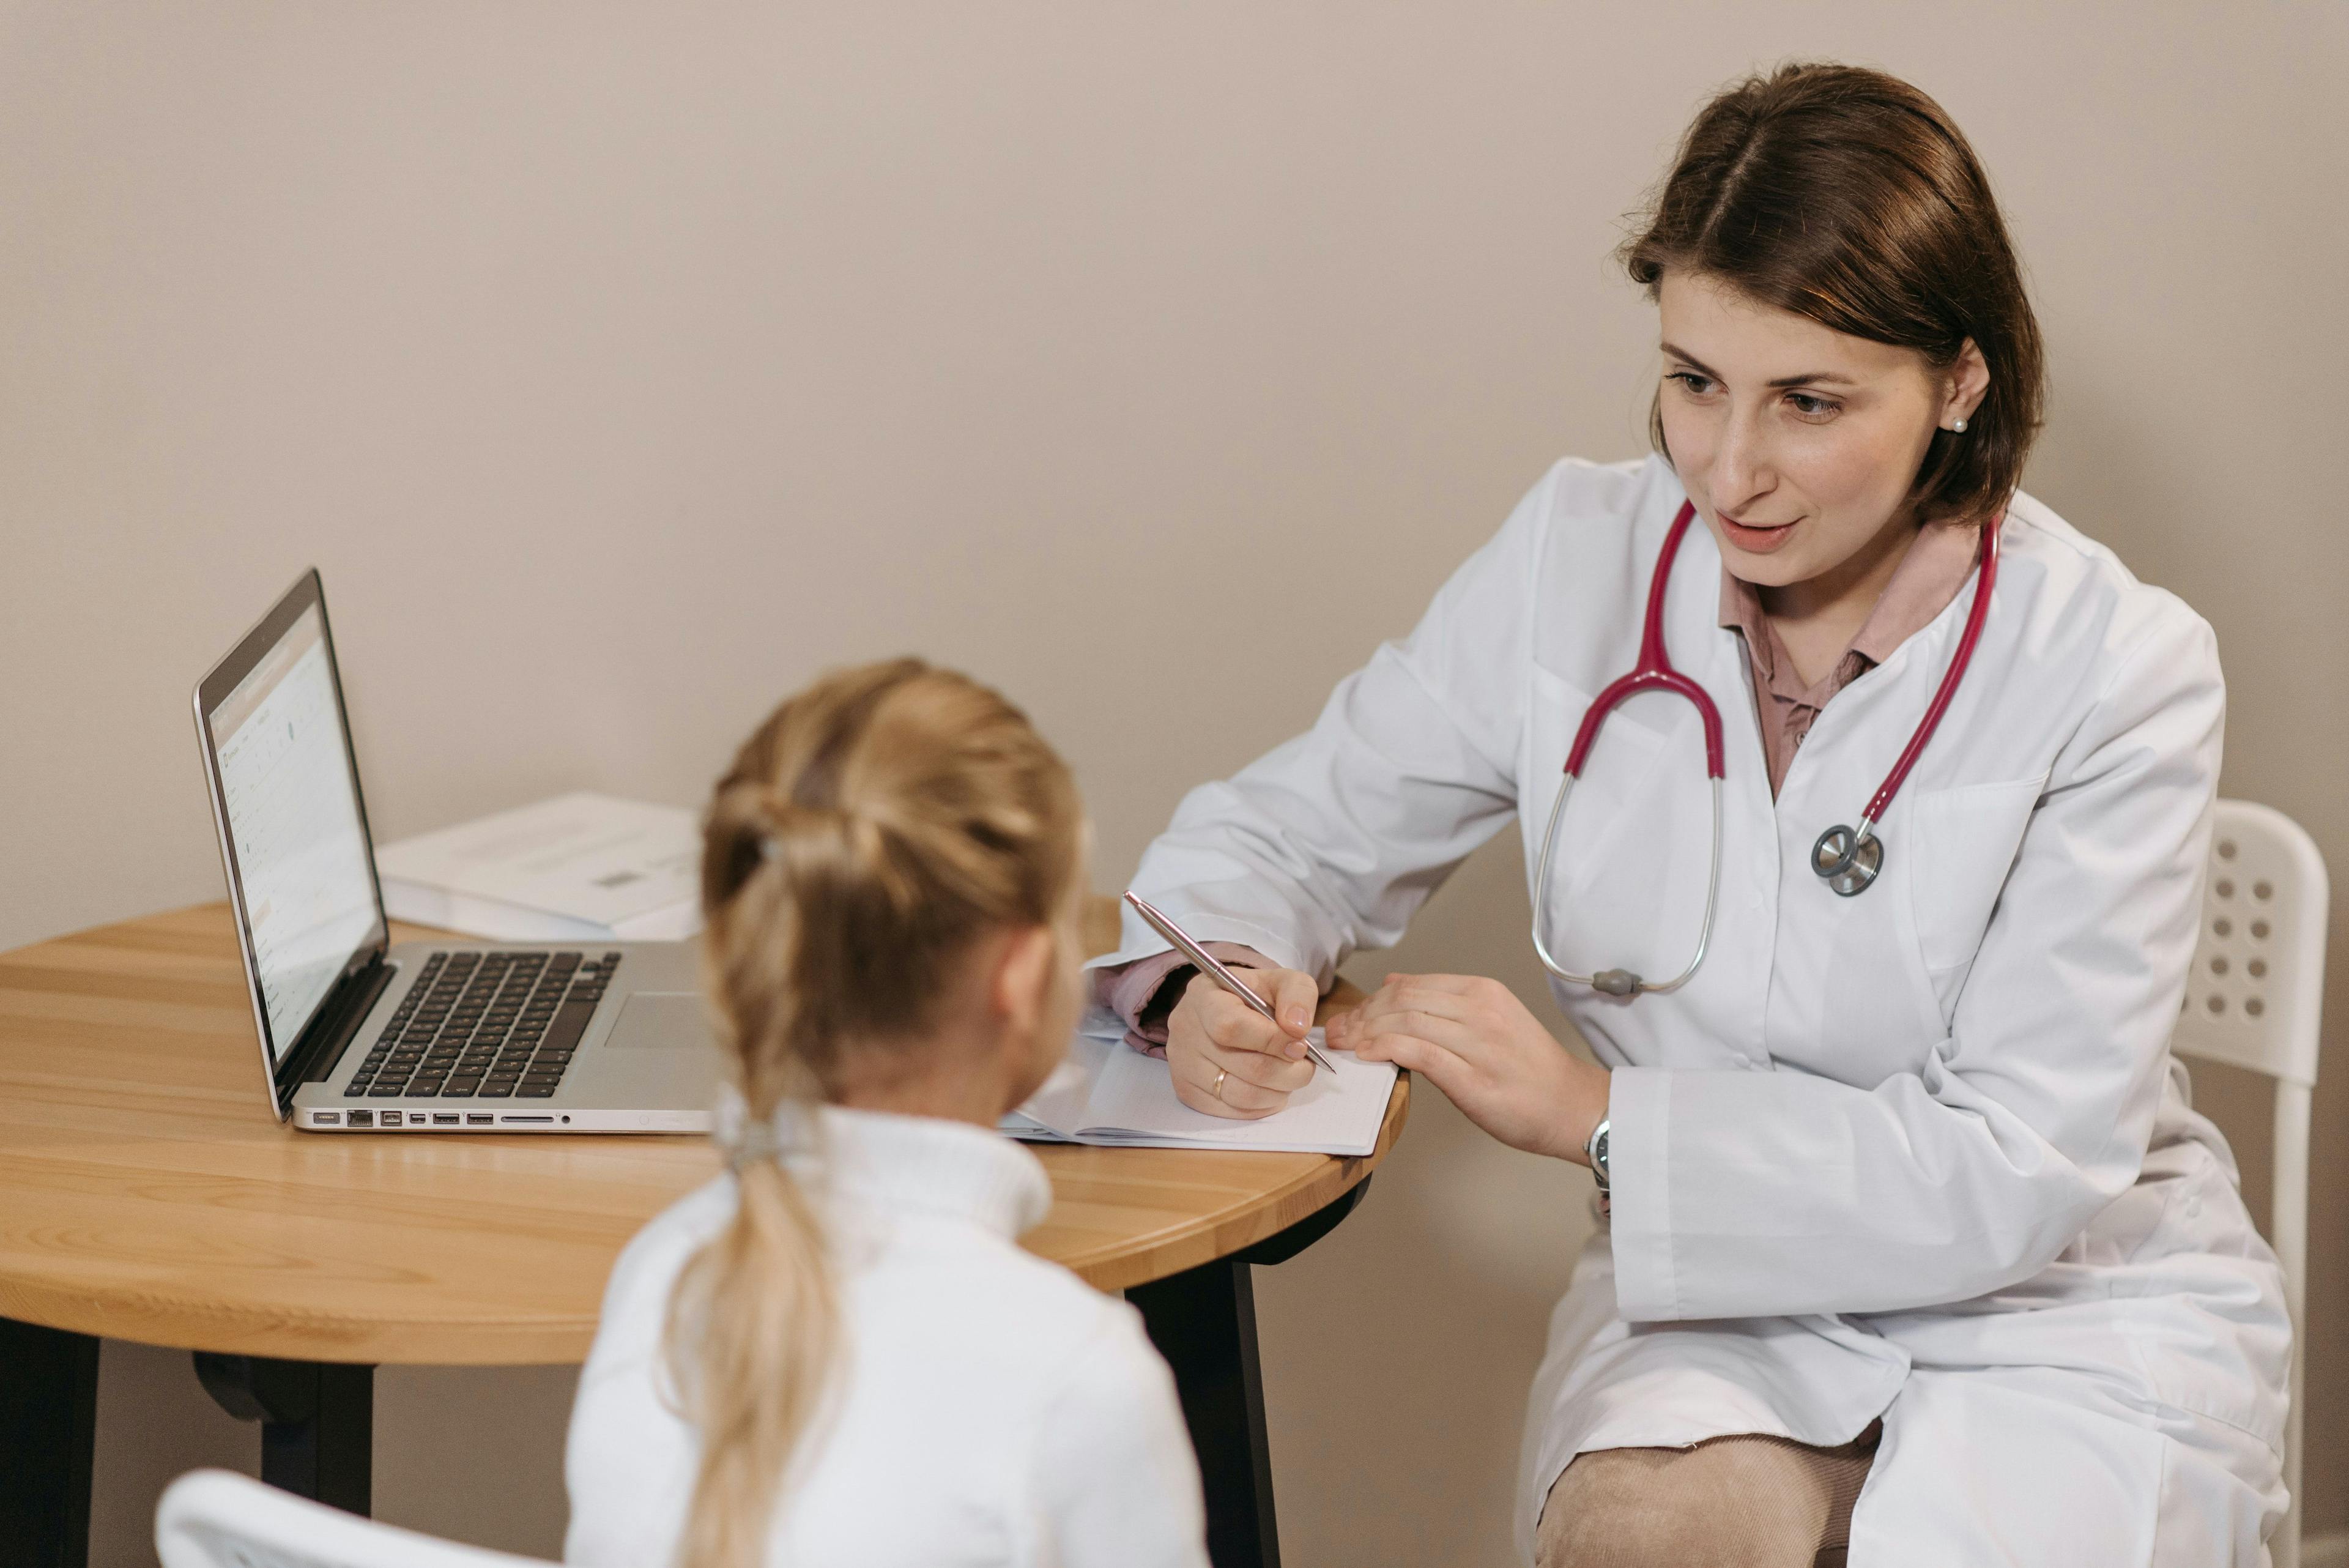 A pediatrician having a discussion with a young girl.